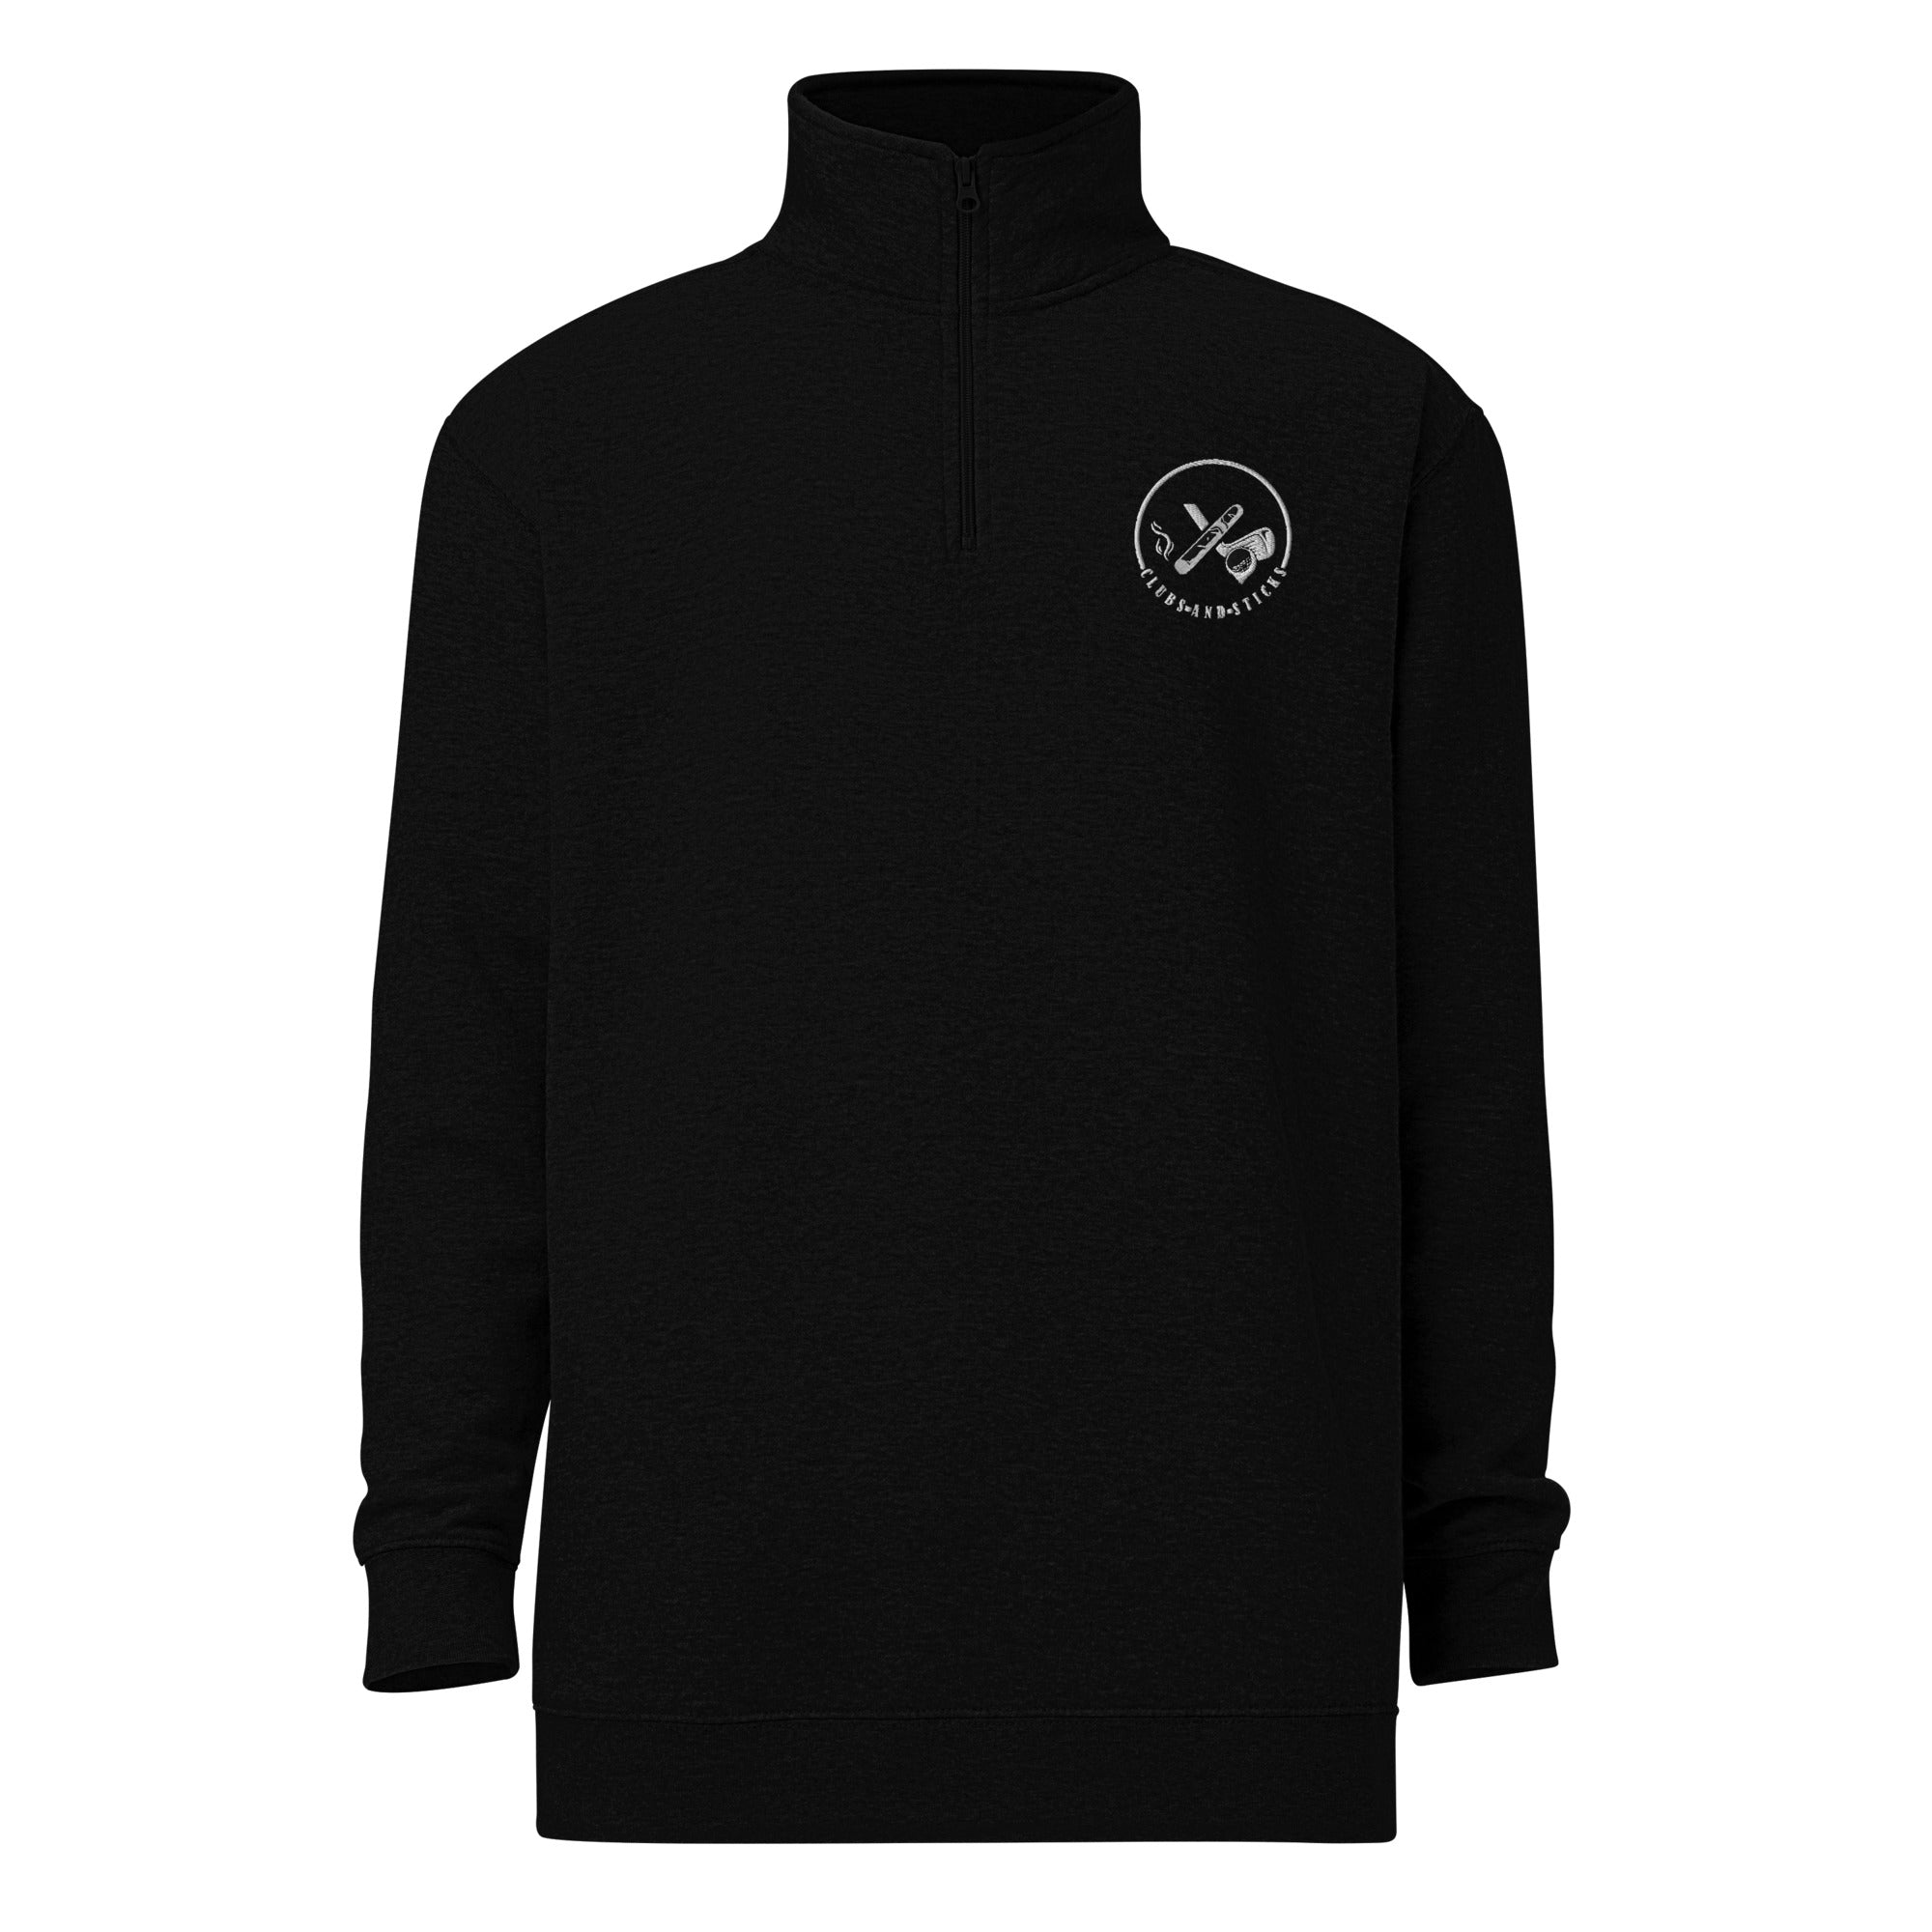 Ladies Embroidered fleece pullover